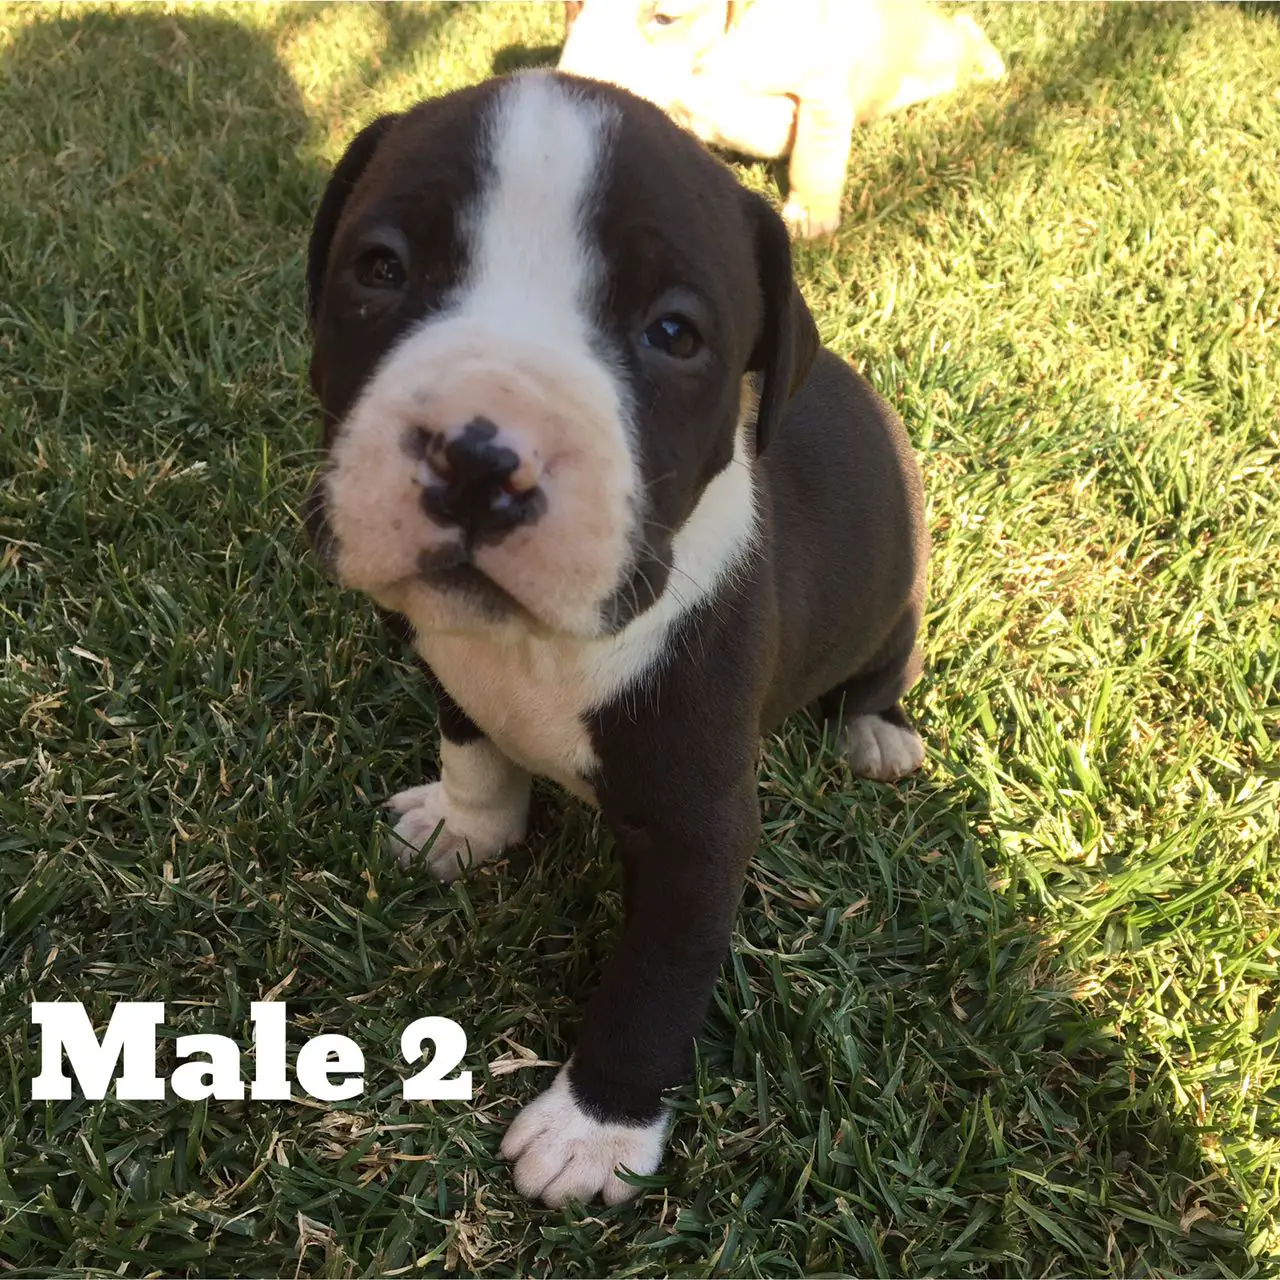 Pitbull Puppies for Sale in Johannesburg by martie1979